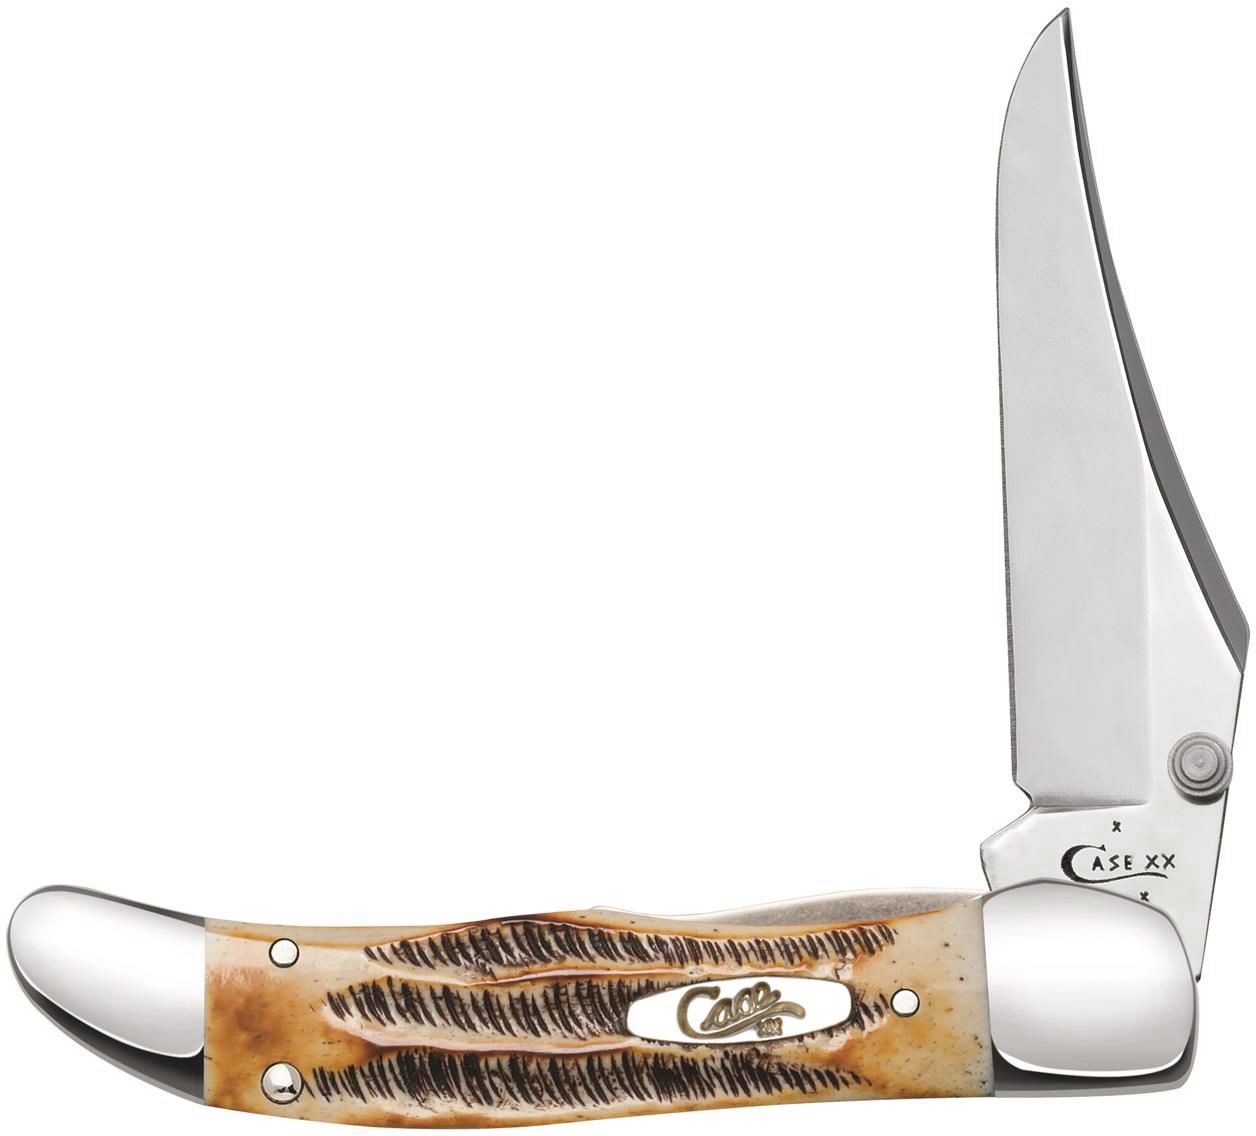 Case Bonestag Kickstart Assisted Mid-Folding Hunter with Clip 4 Closed  (6.51265AC SS) - KnifeCenter - 65314 - Discontinued